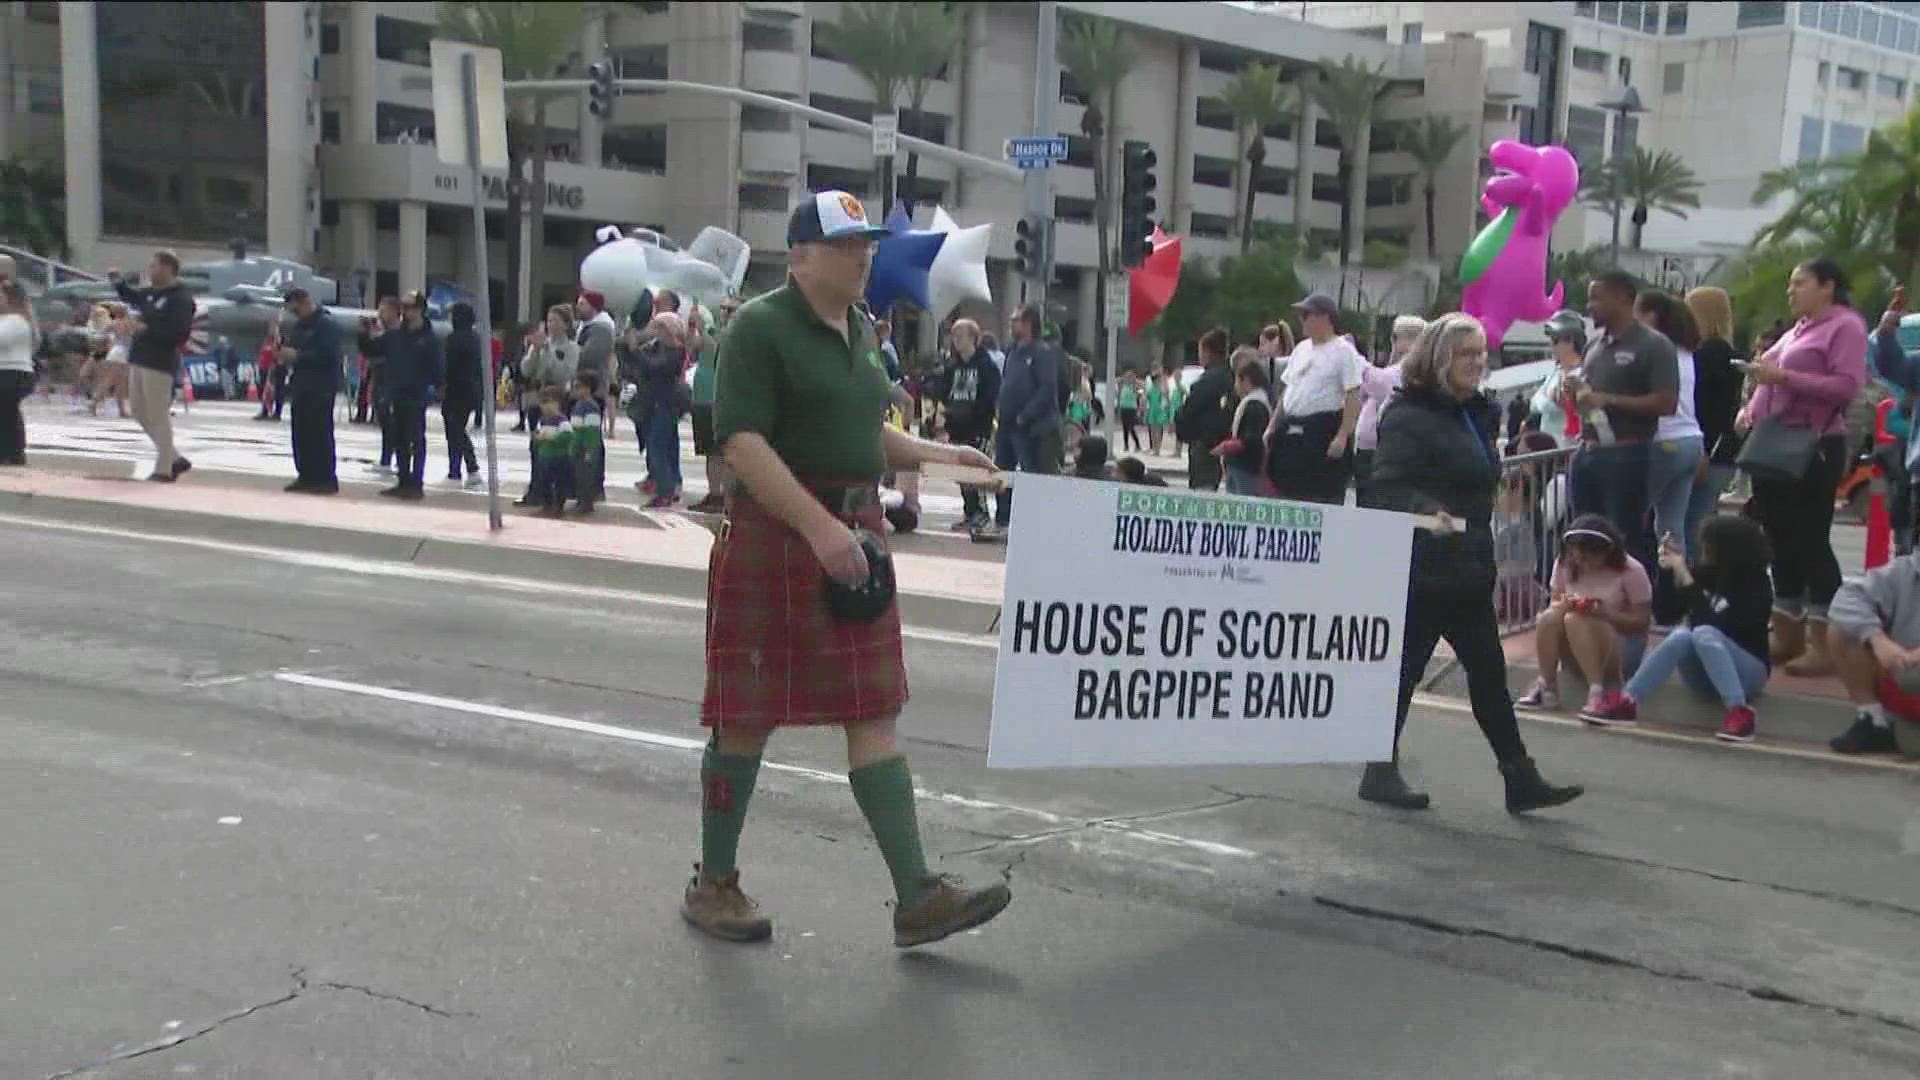 The Port of San Diego Holiday Bowl Parade presented by Kaiser Permanente was live-streamed on CBS8+ in its entirety.